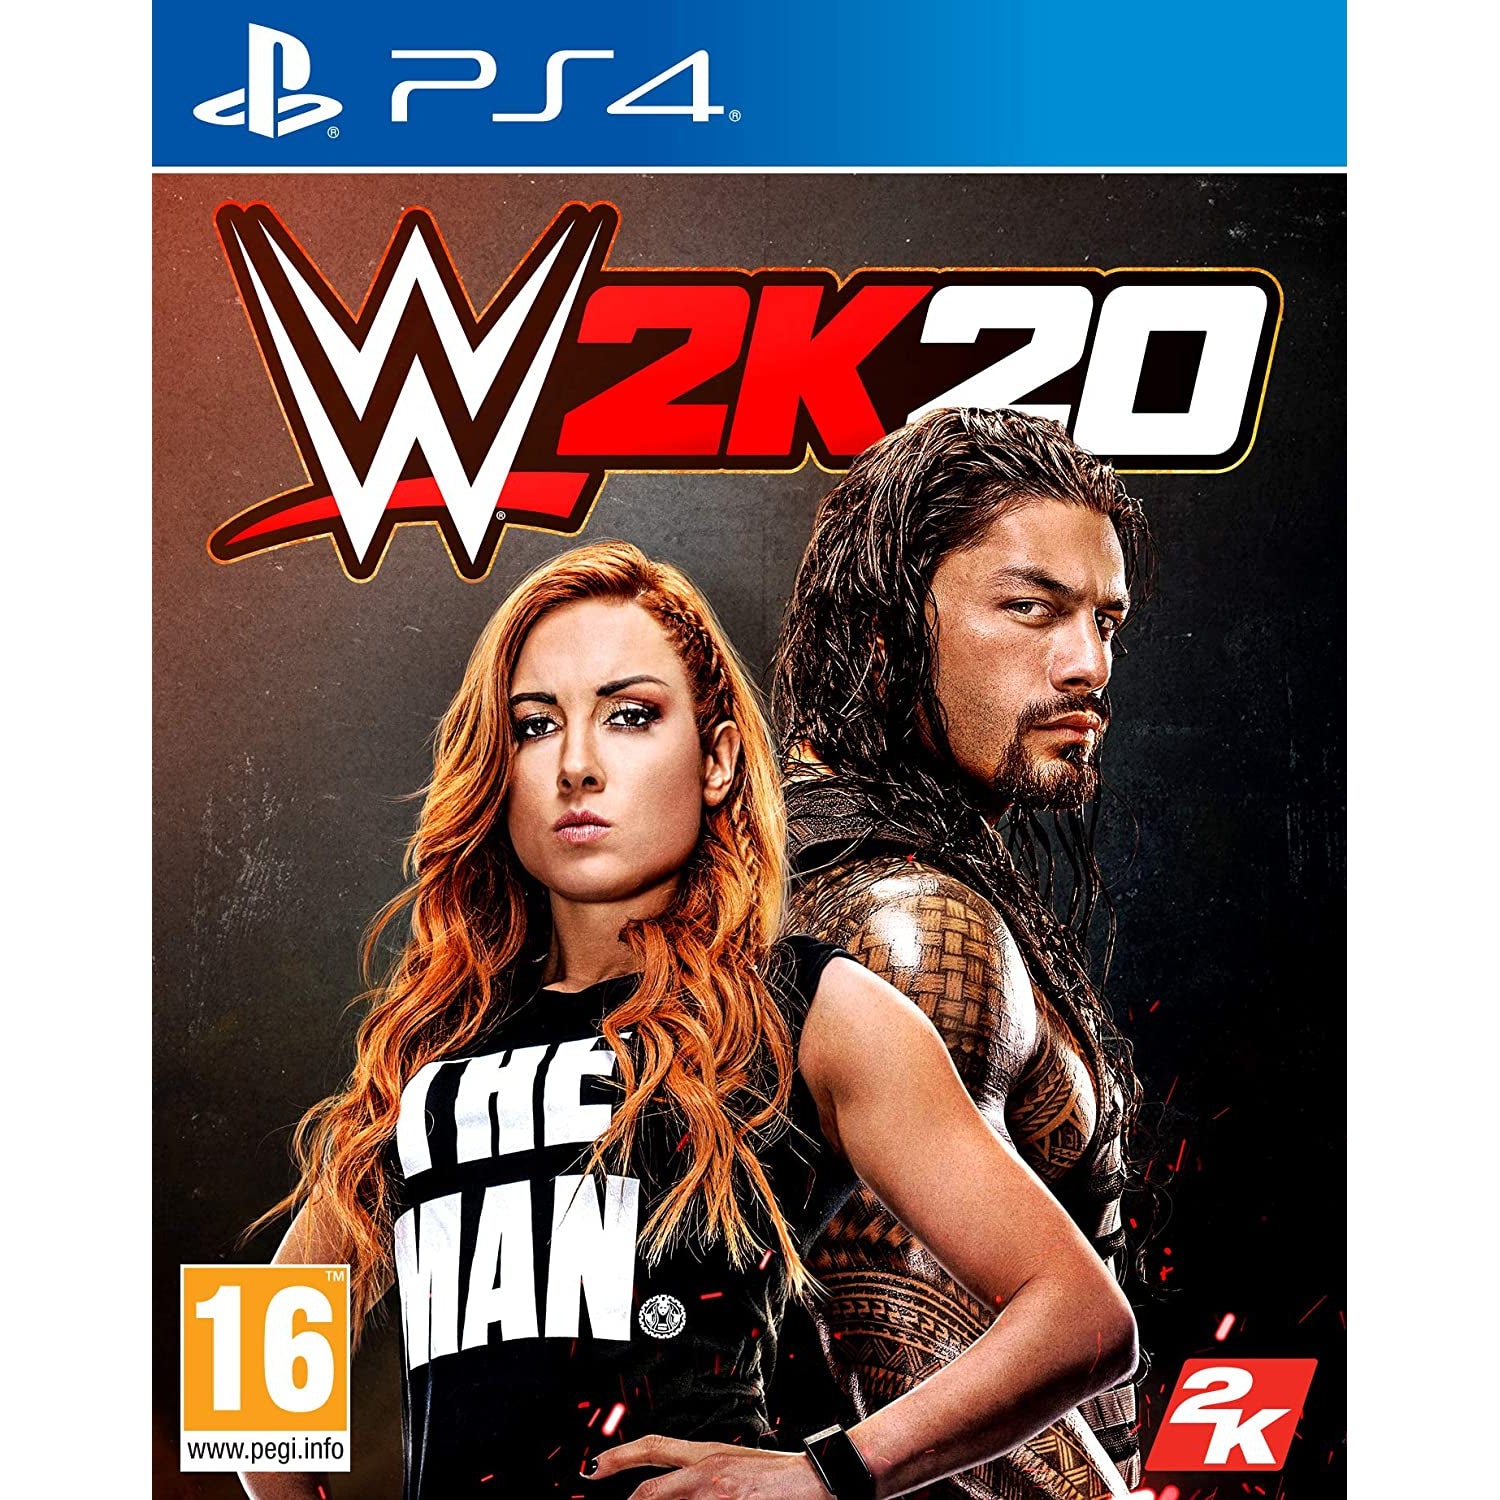 WWE 2K20 Video Game for Playstation 4 (PS4)